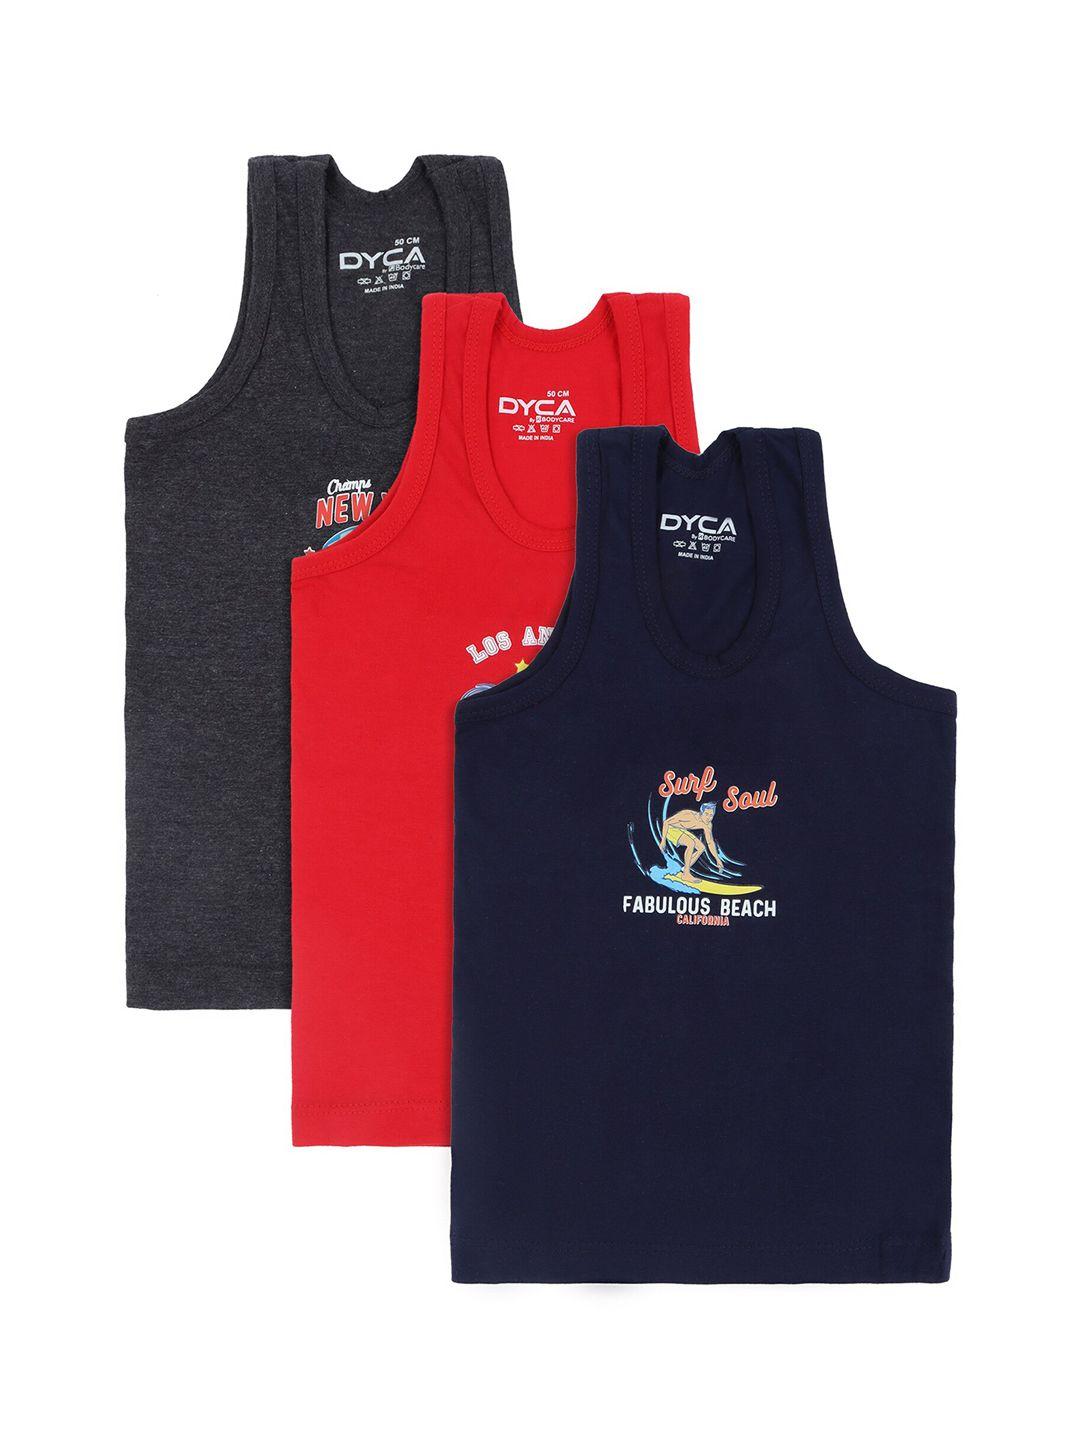 DYCA Boys Pack of 3 Assorted Cotton Innerwear Vests